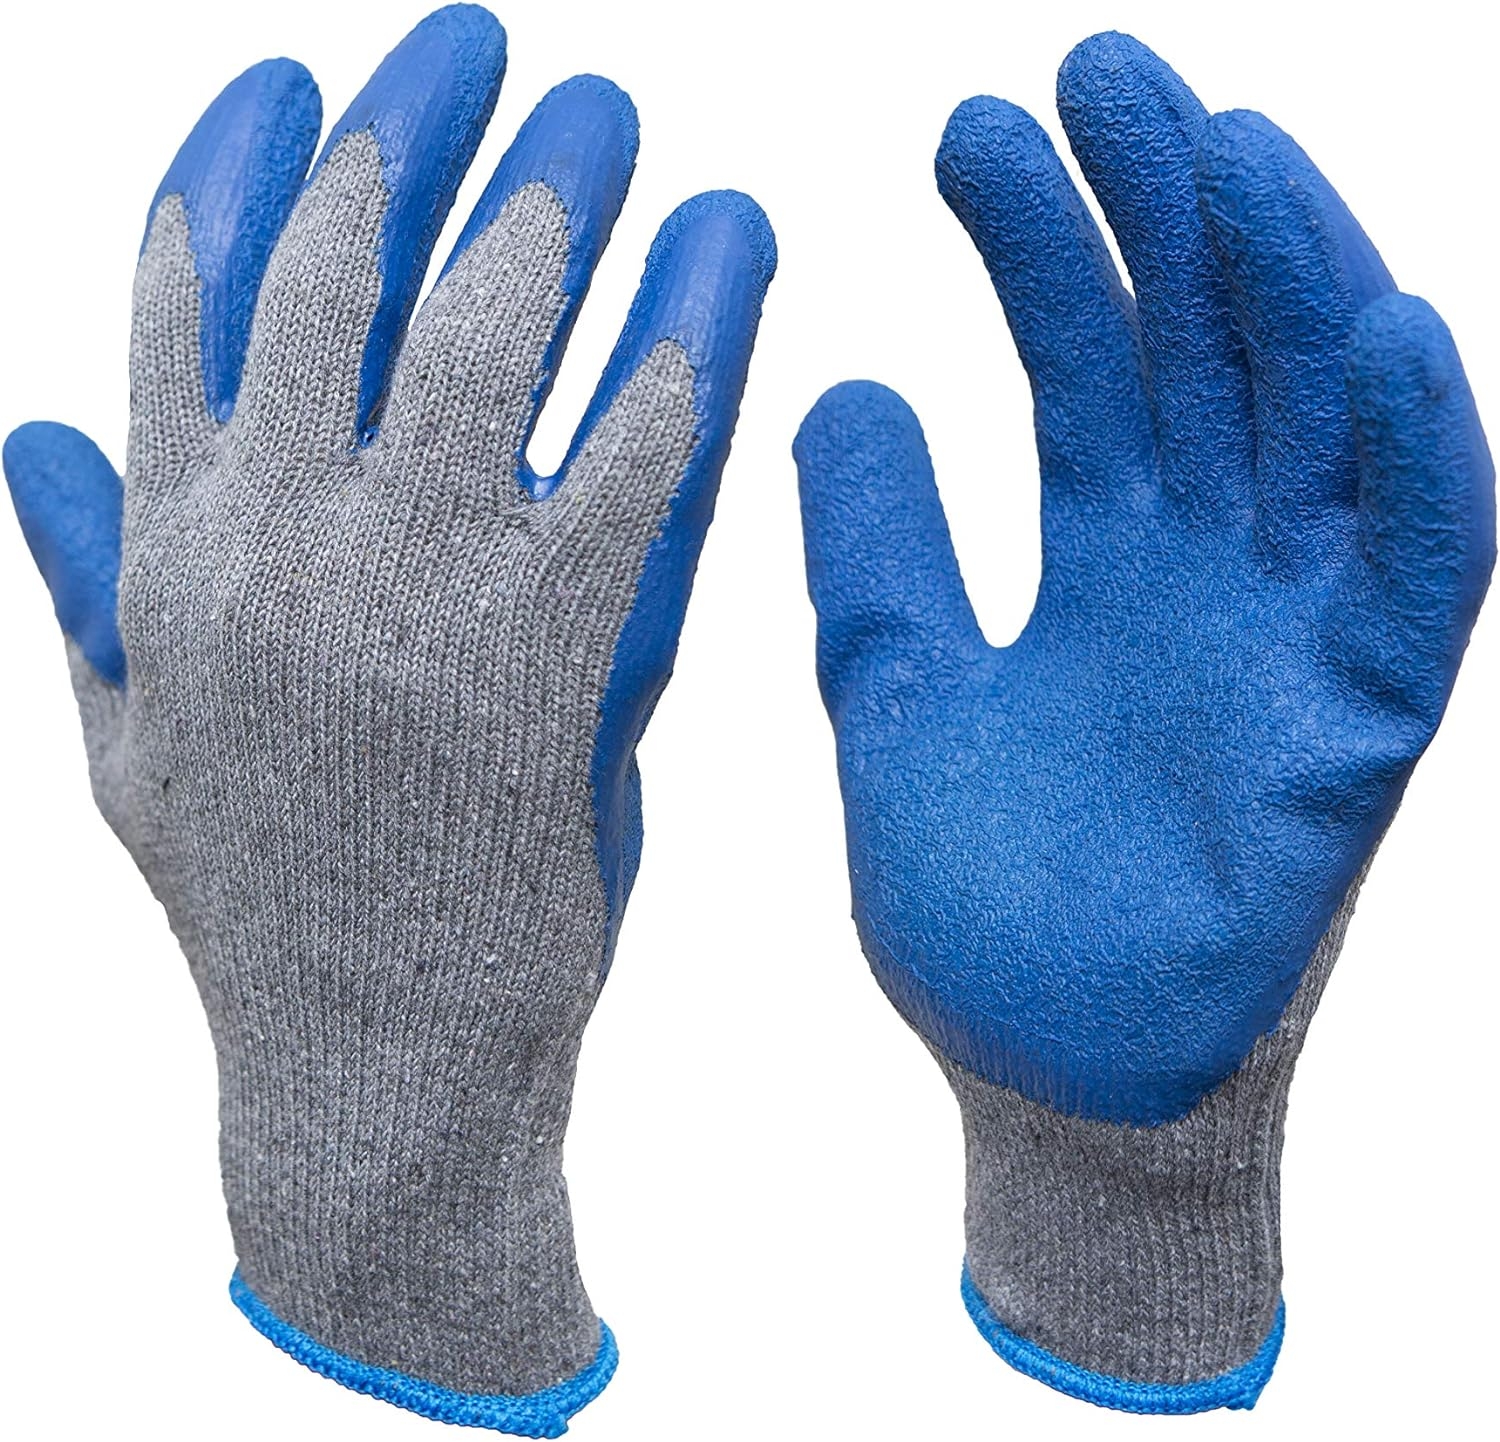 G & F Products - 3100S-10 120 Pairs Small Rubber Latex Double Coated Work Gloves for Construction, gardening gloves, heavy duty Cotton Blend Blue